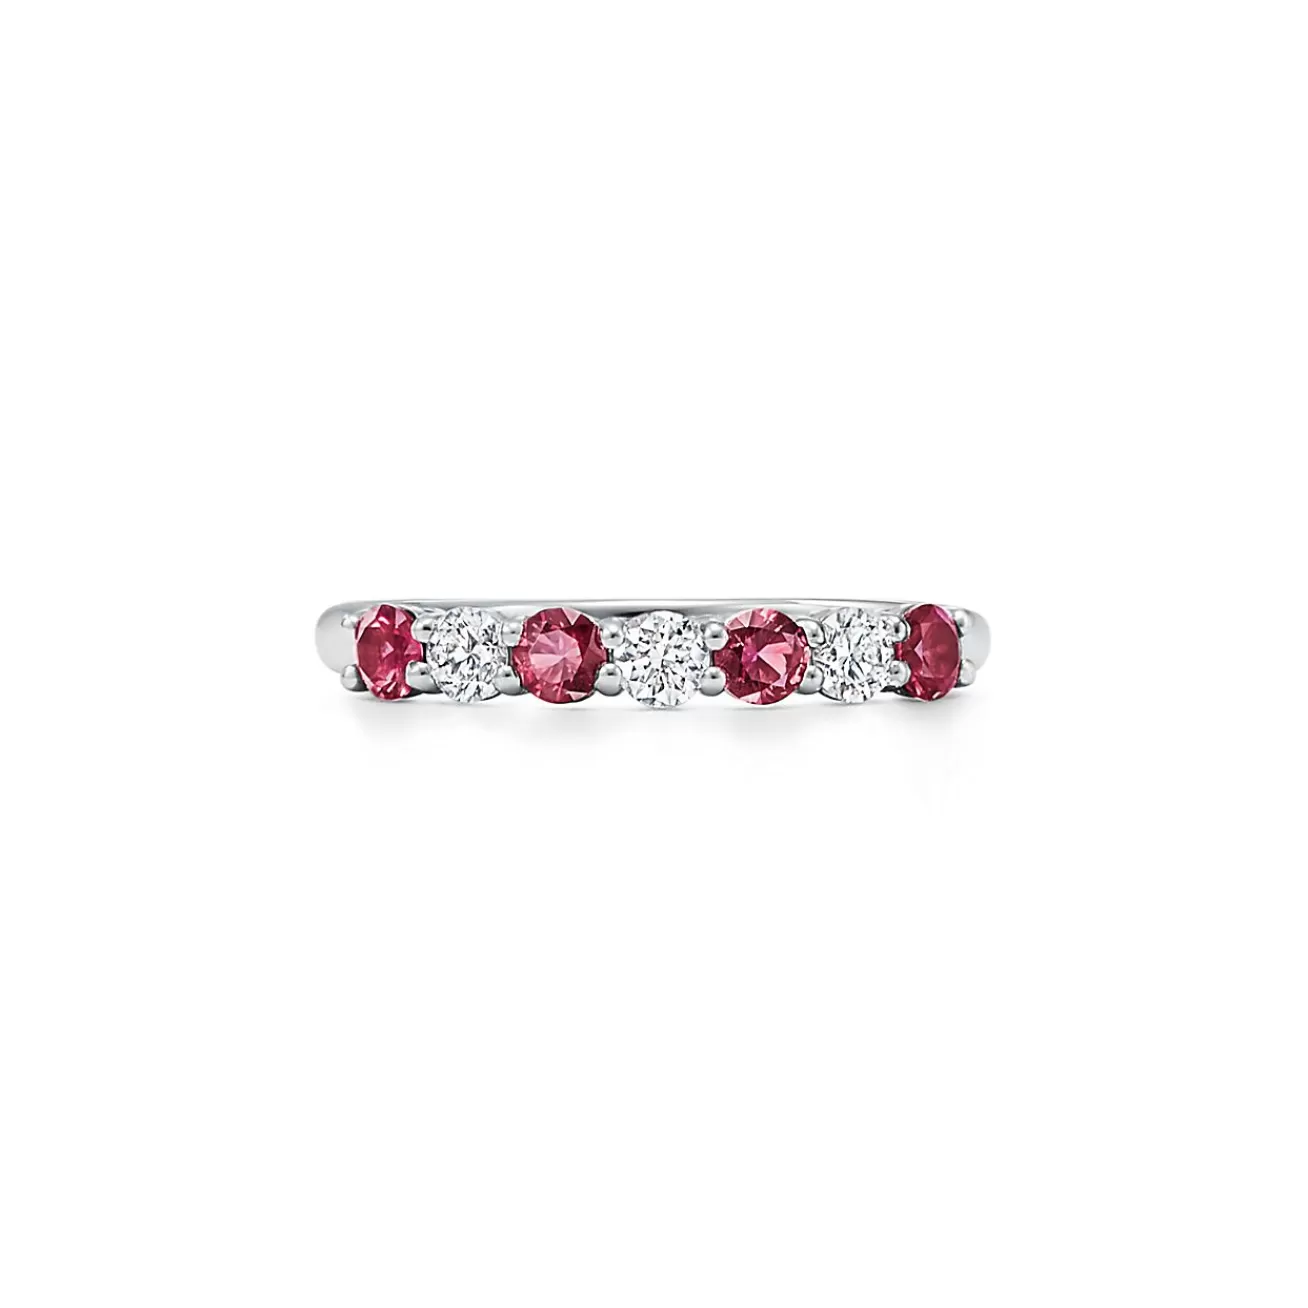 Tiffany & Co. Tiffany Forever Band Ring in Platinum with a Half-circle of Rubies & Diamonds | ^Women Rings | Stacking Rings